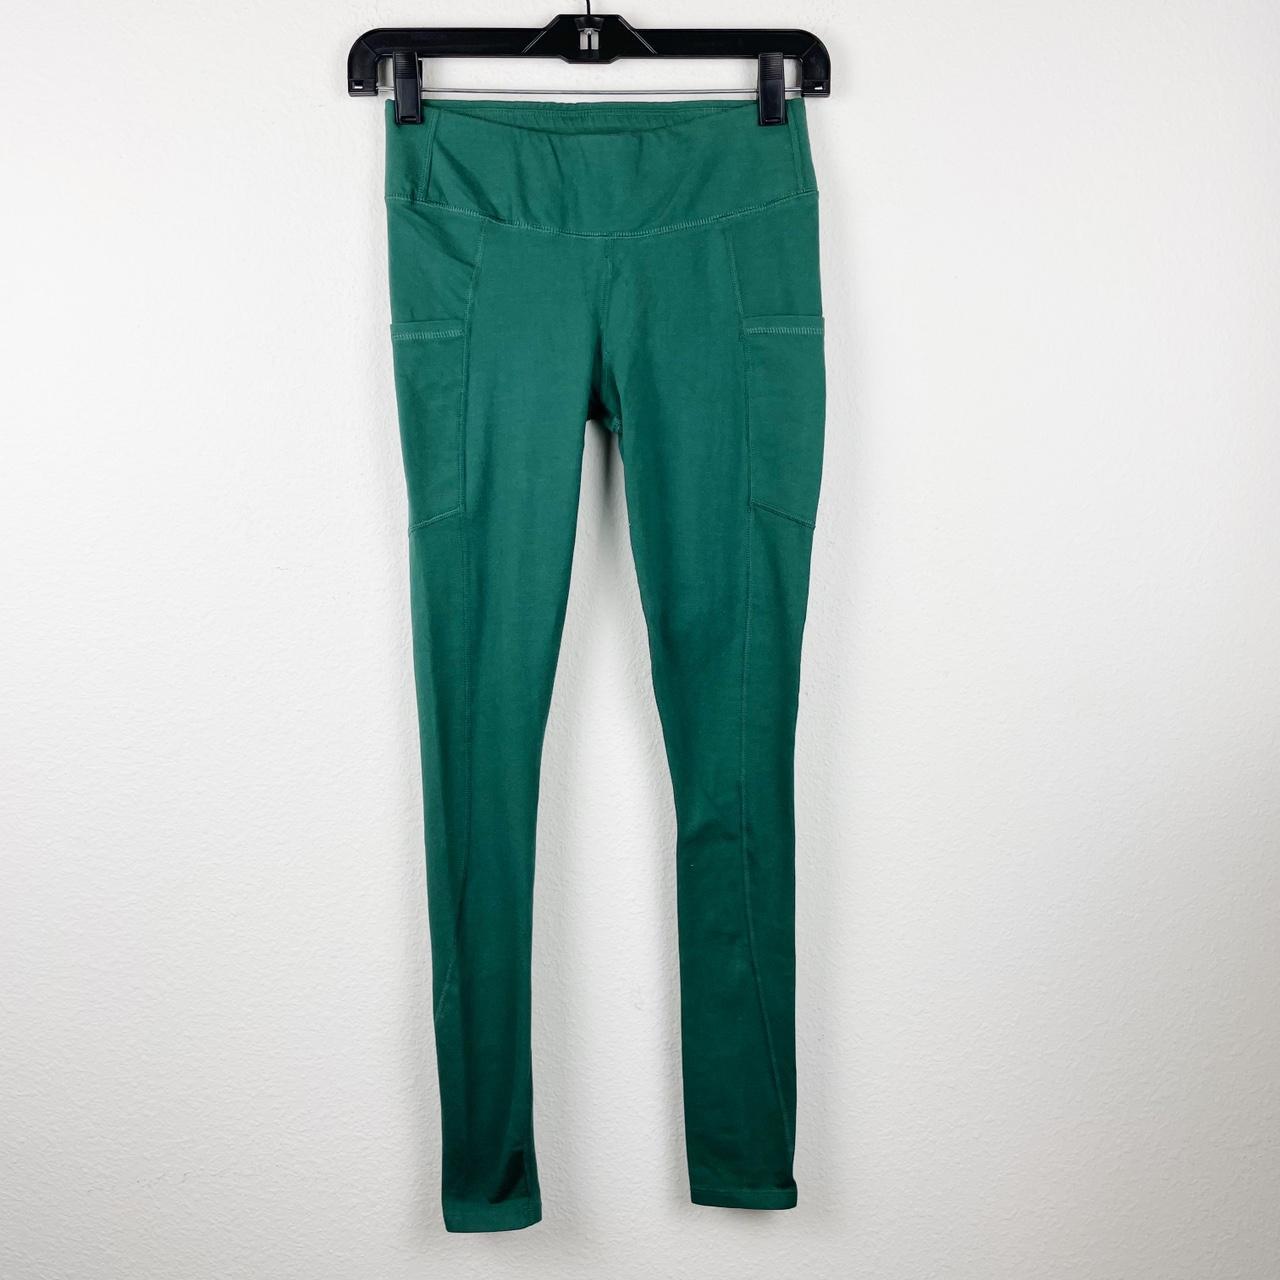 Forrest Green Pact Sustainable Leggings In great - Depop